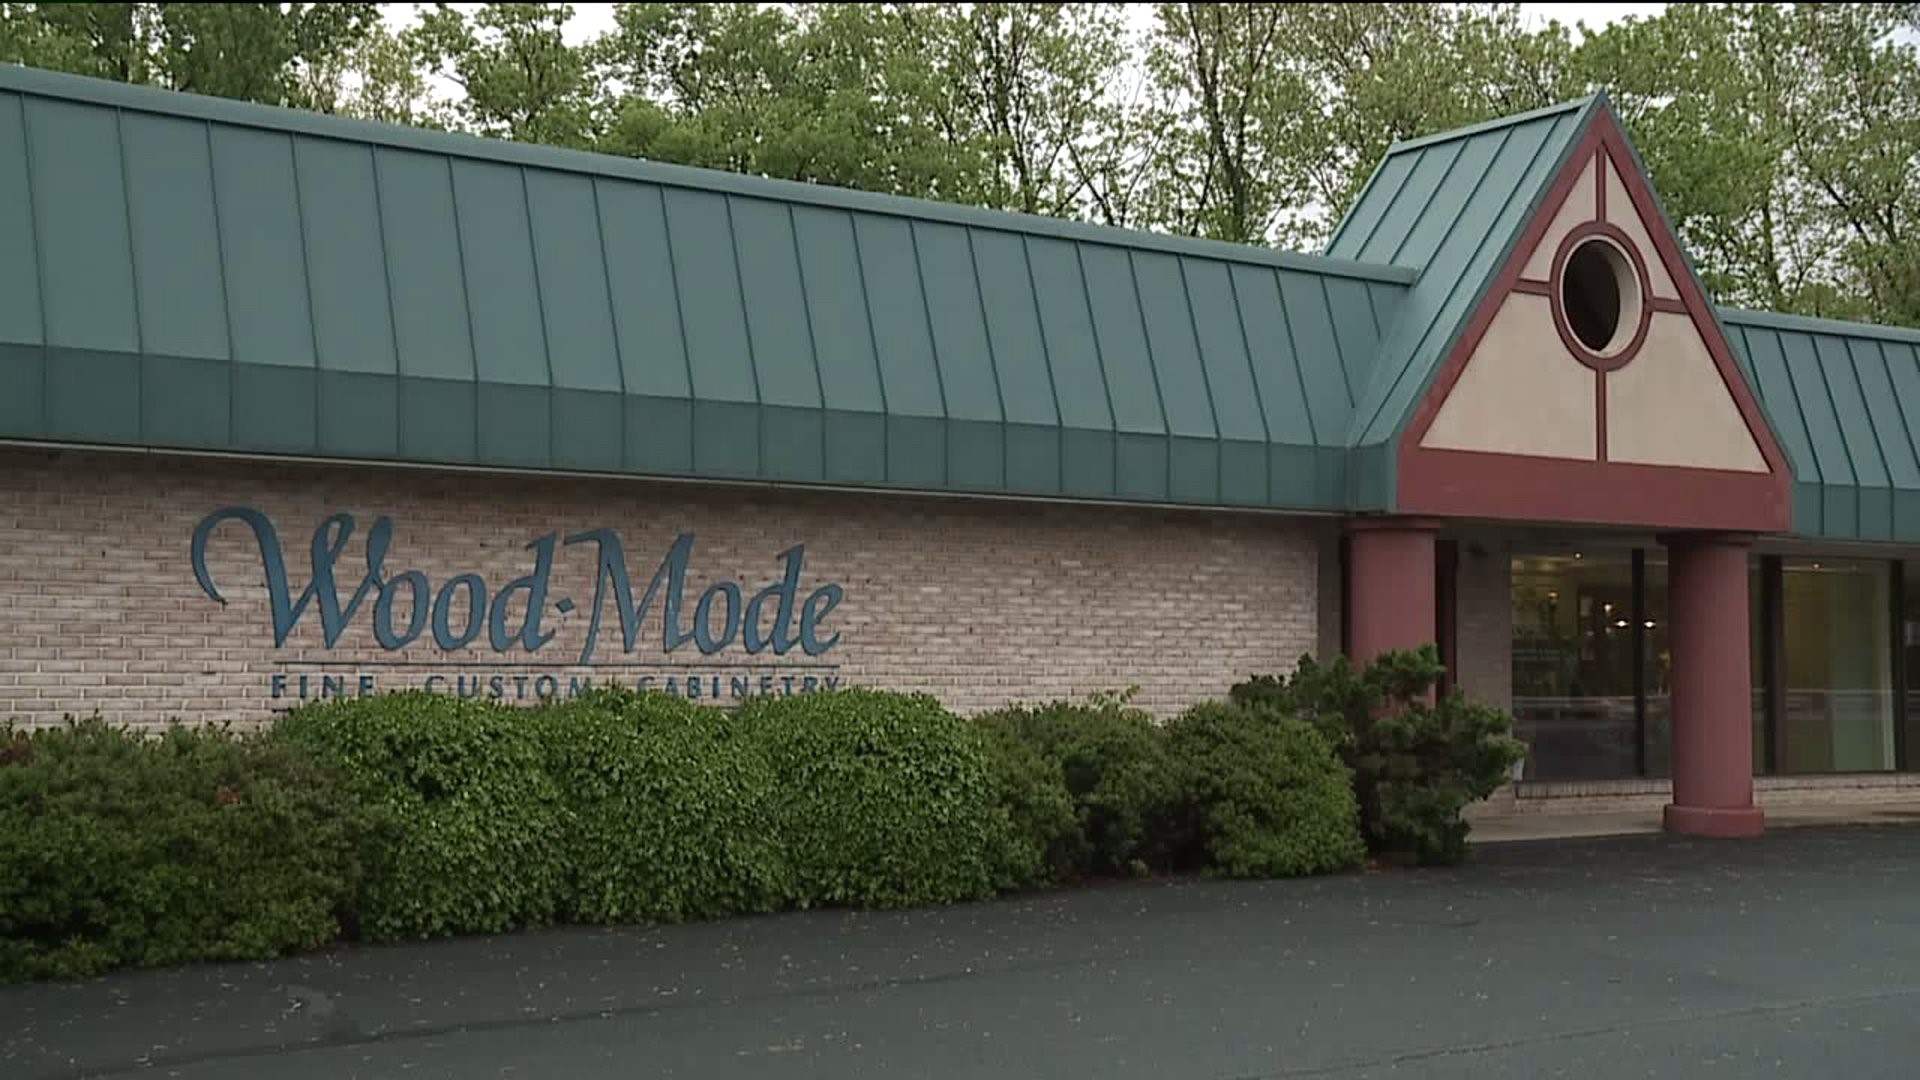 Wood-Mode Closure Leaves Hundreds Looking for New Jobs